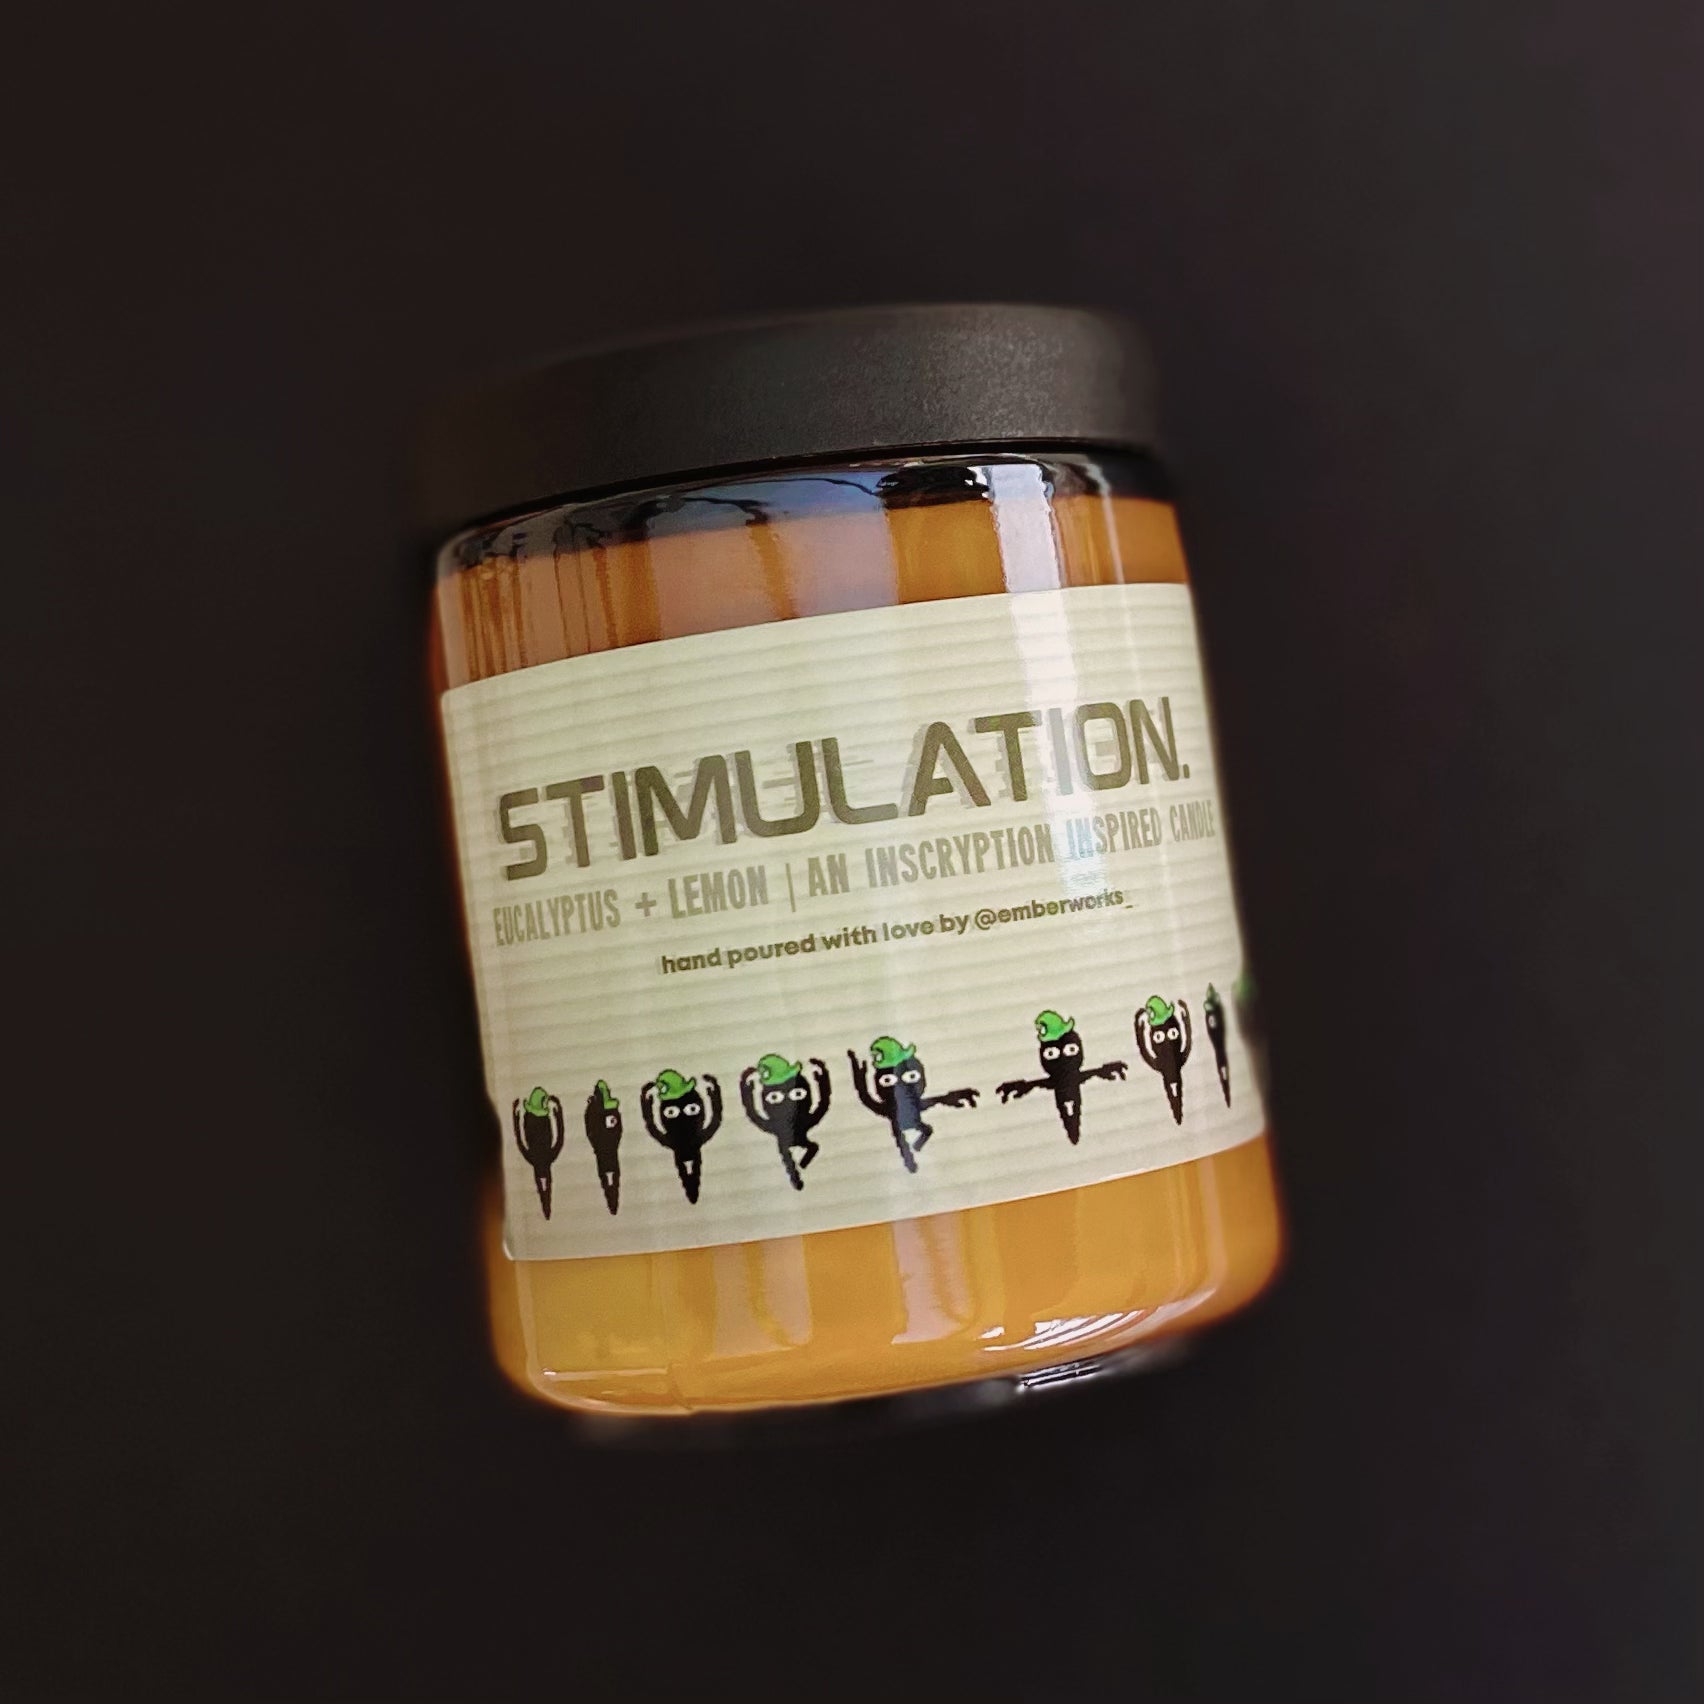 Stimulation - An Inscryption Inspired Candle